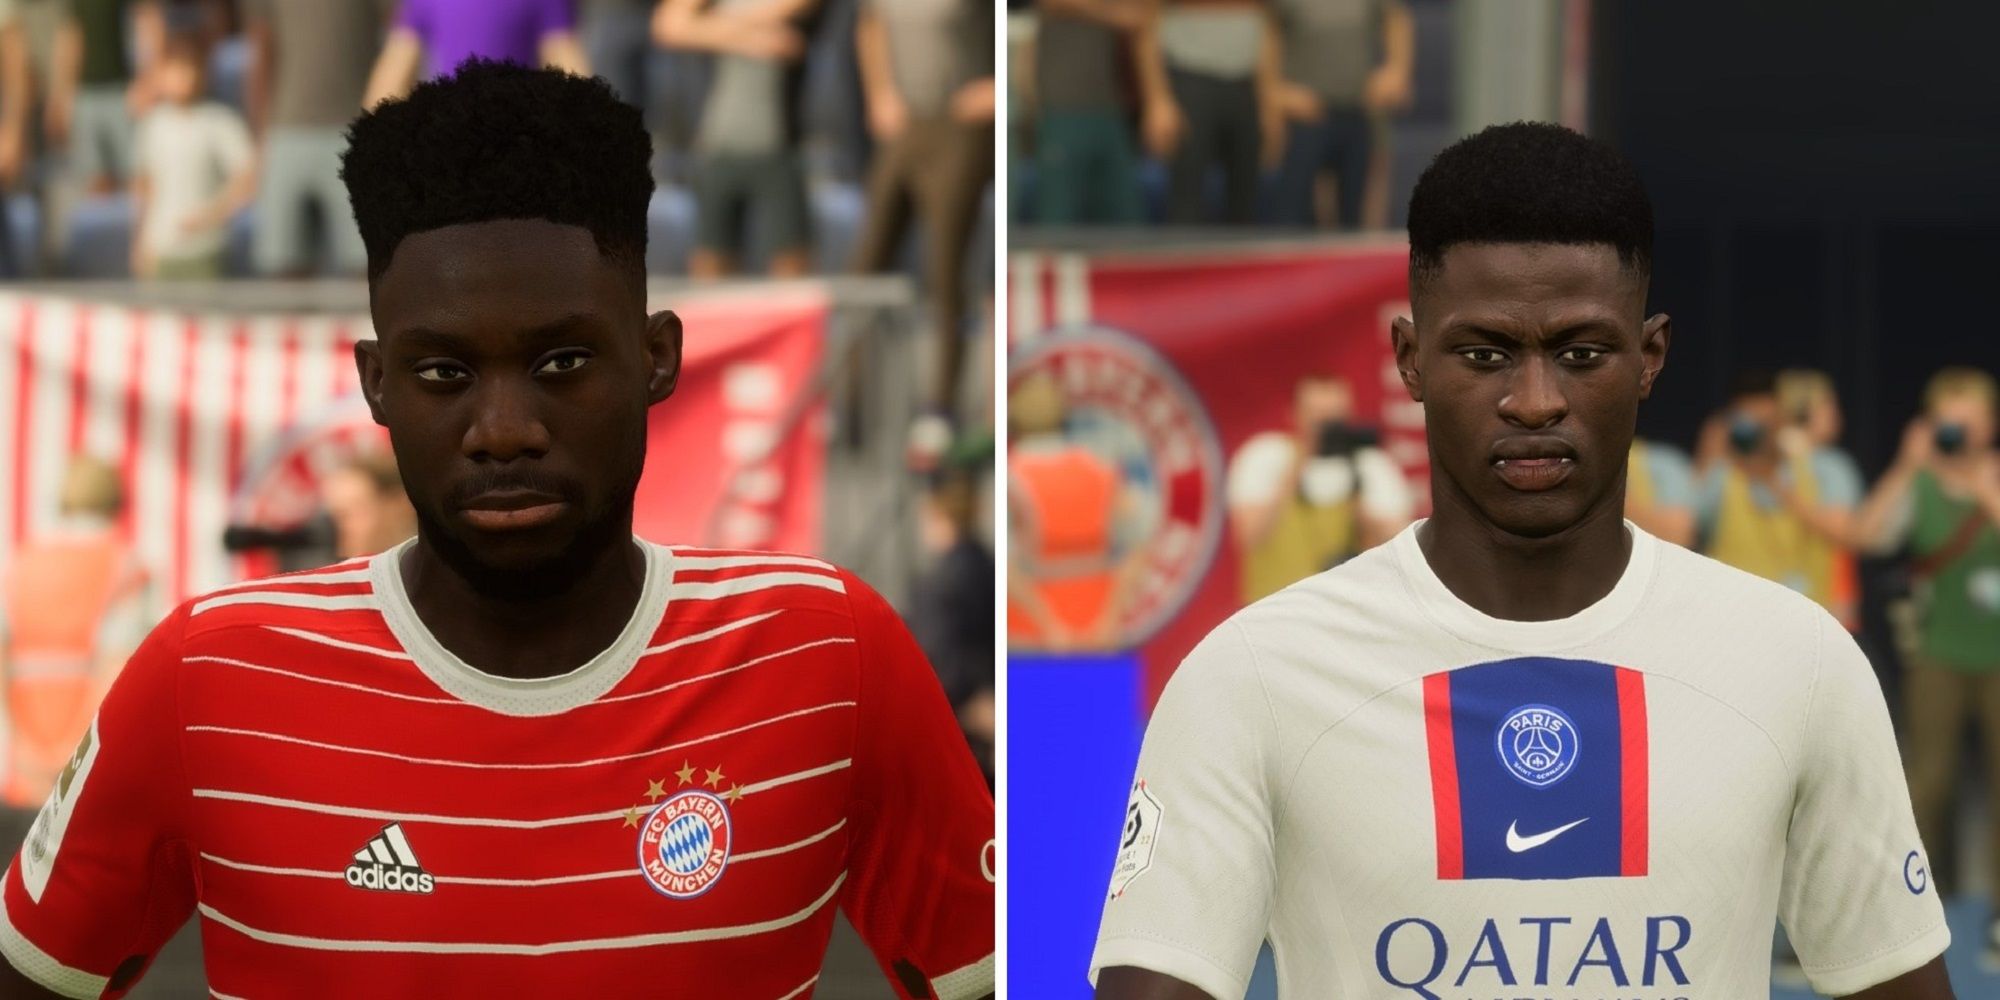 An image of Davies and Mendes in FIFA 23